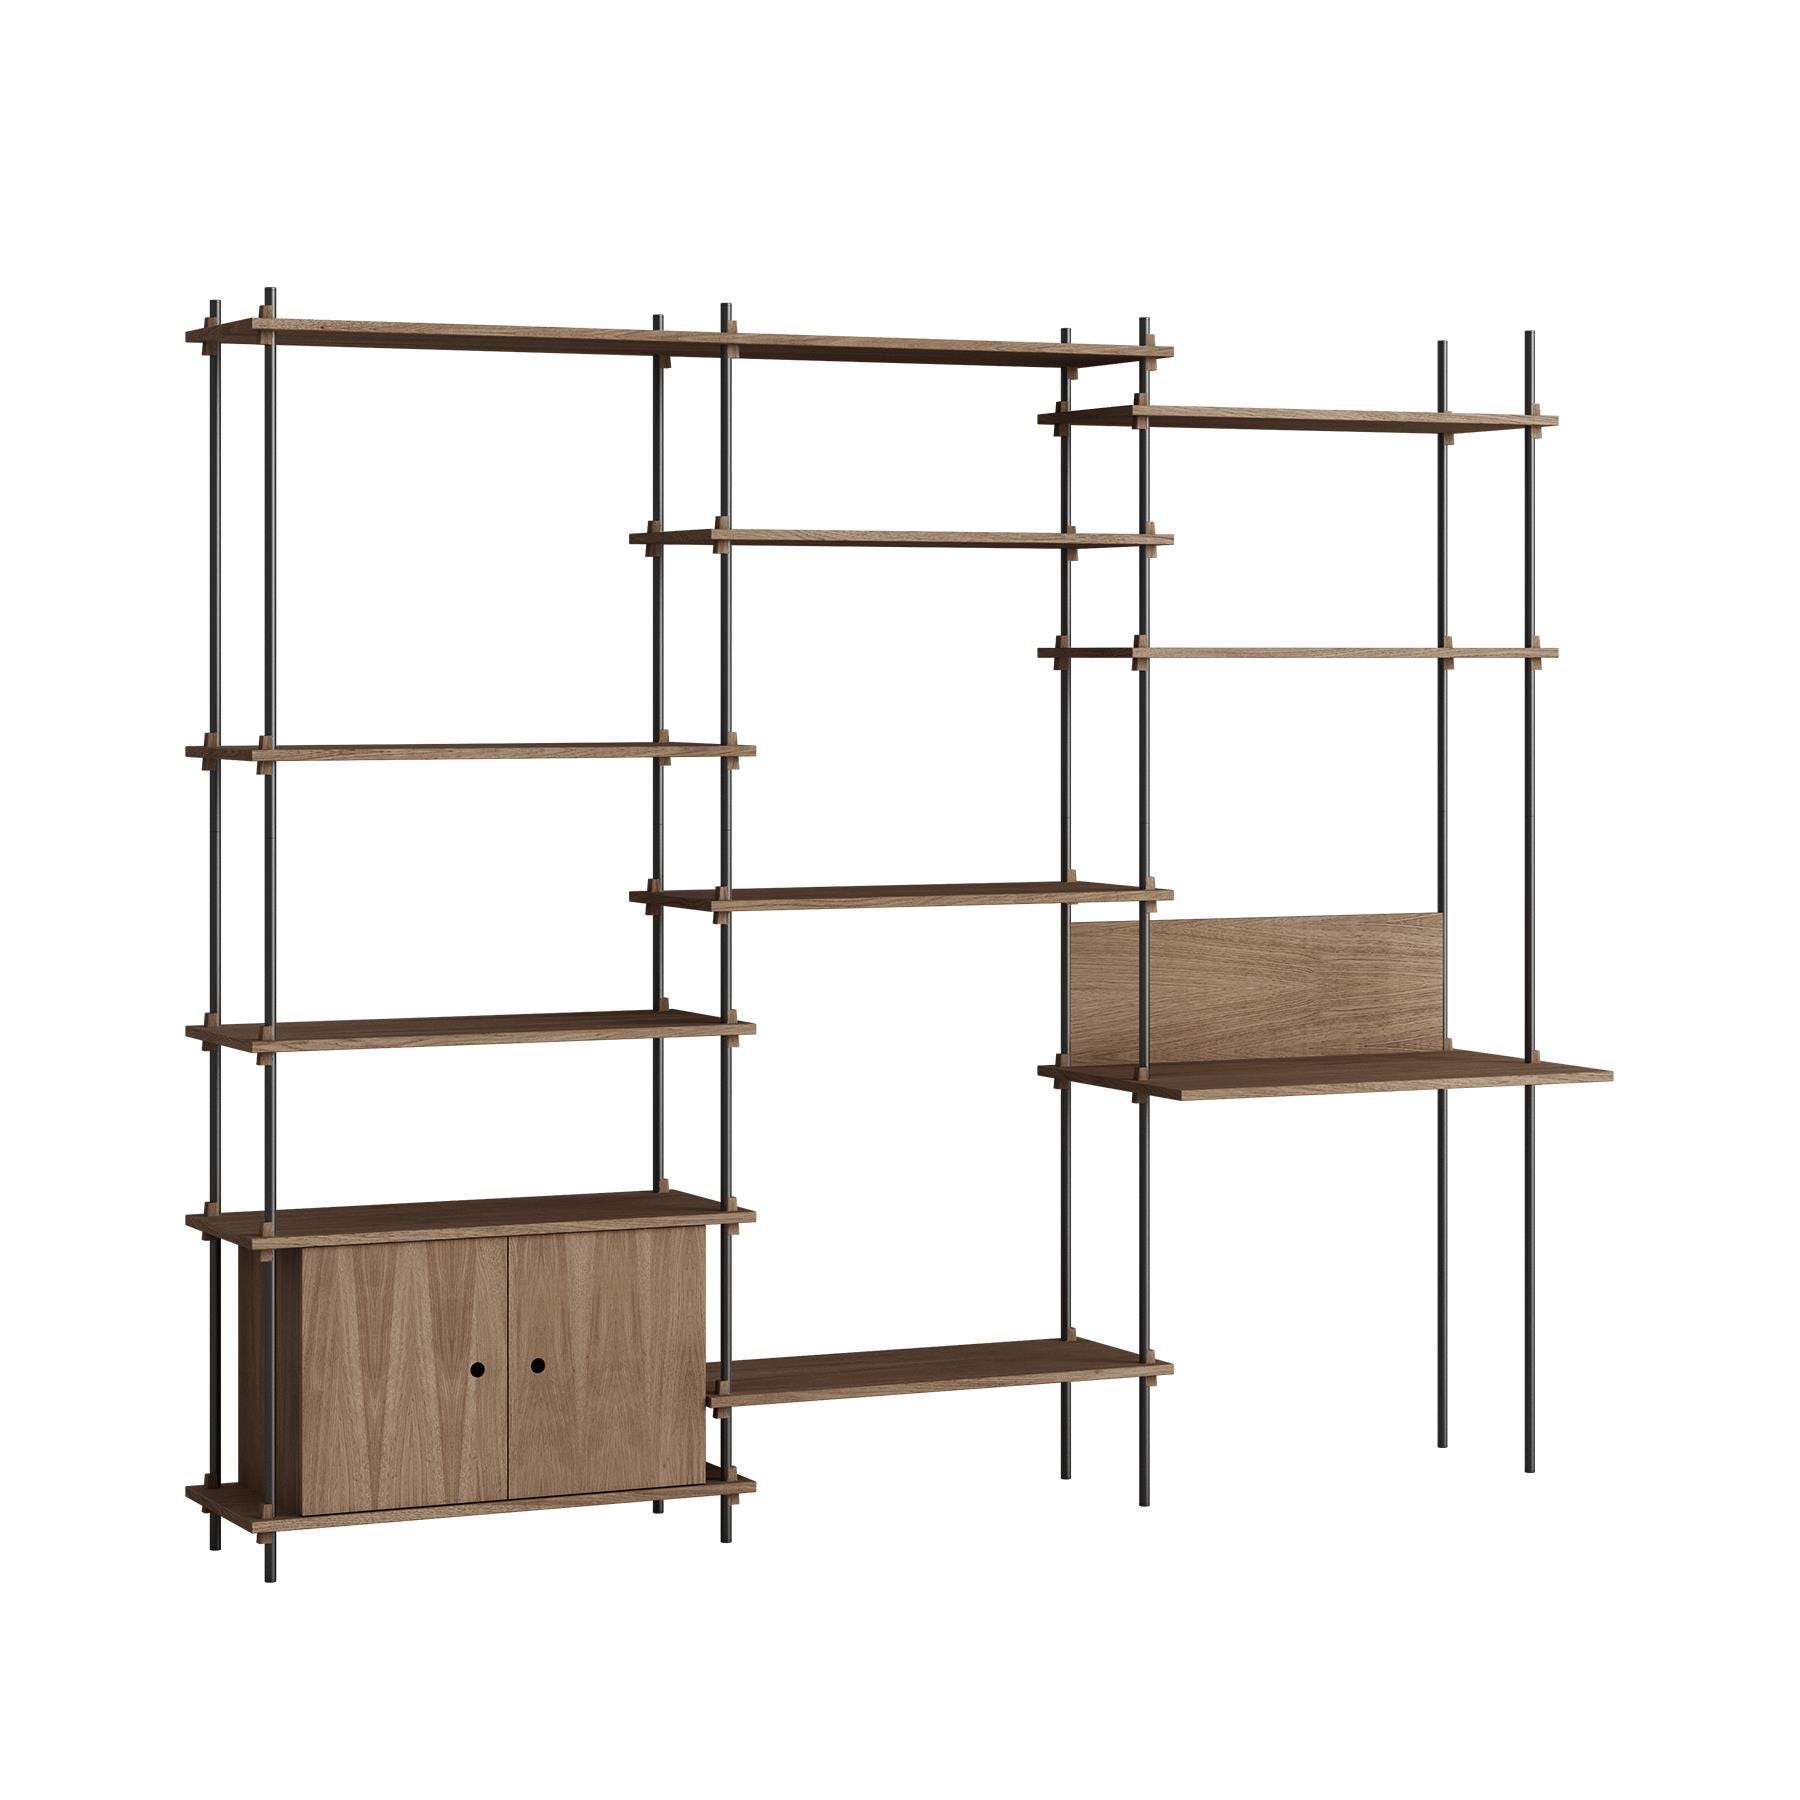 Moebe Triple Shelving System With 1 Cabinet And Desk Smoked Oak Black Dark Wood Designer Furniture From Holloways Of Ludlow